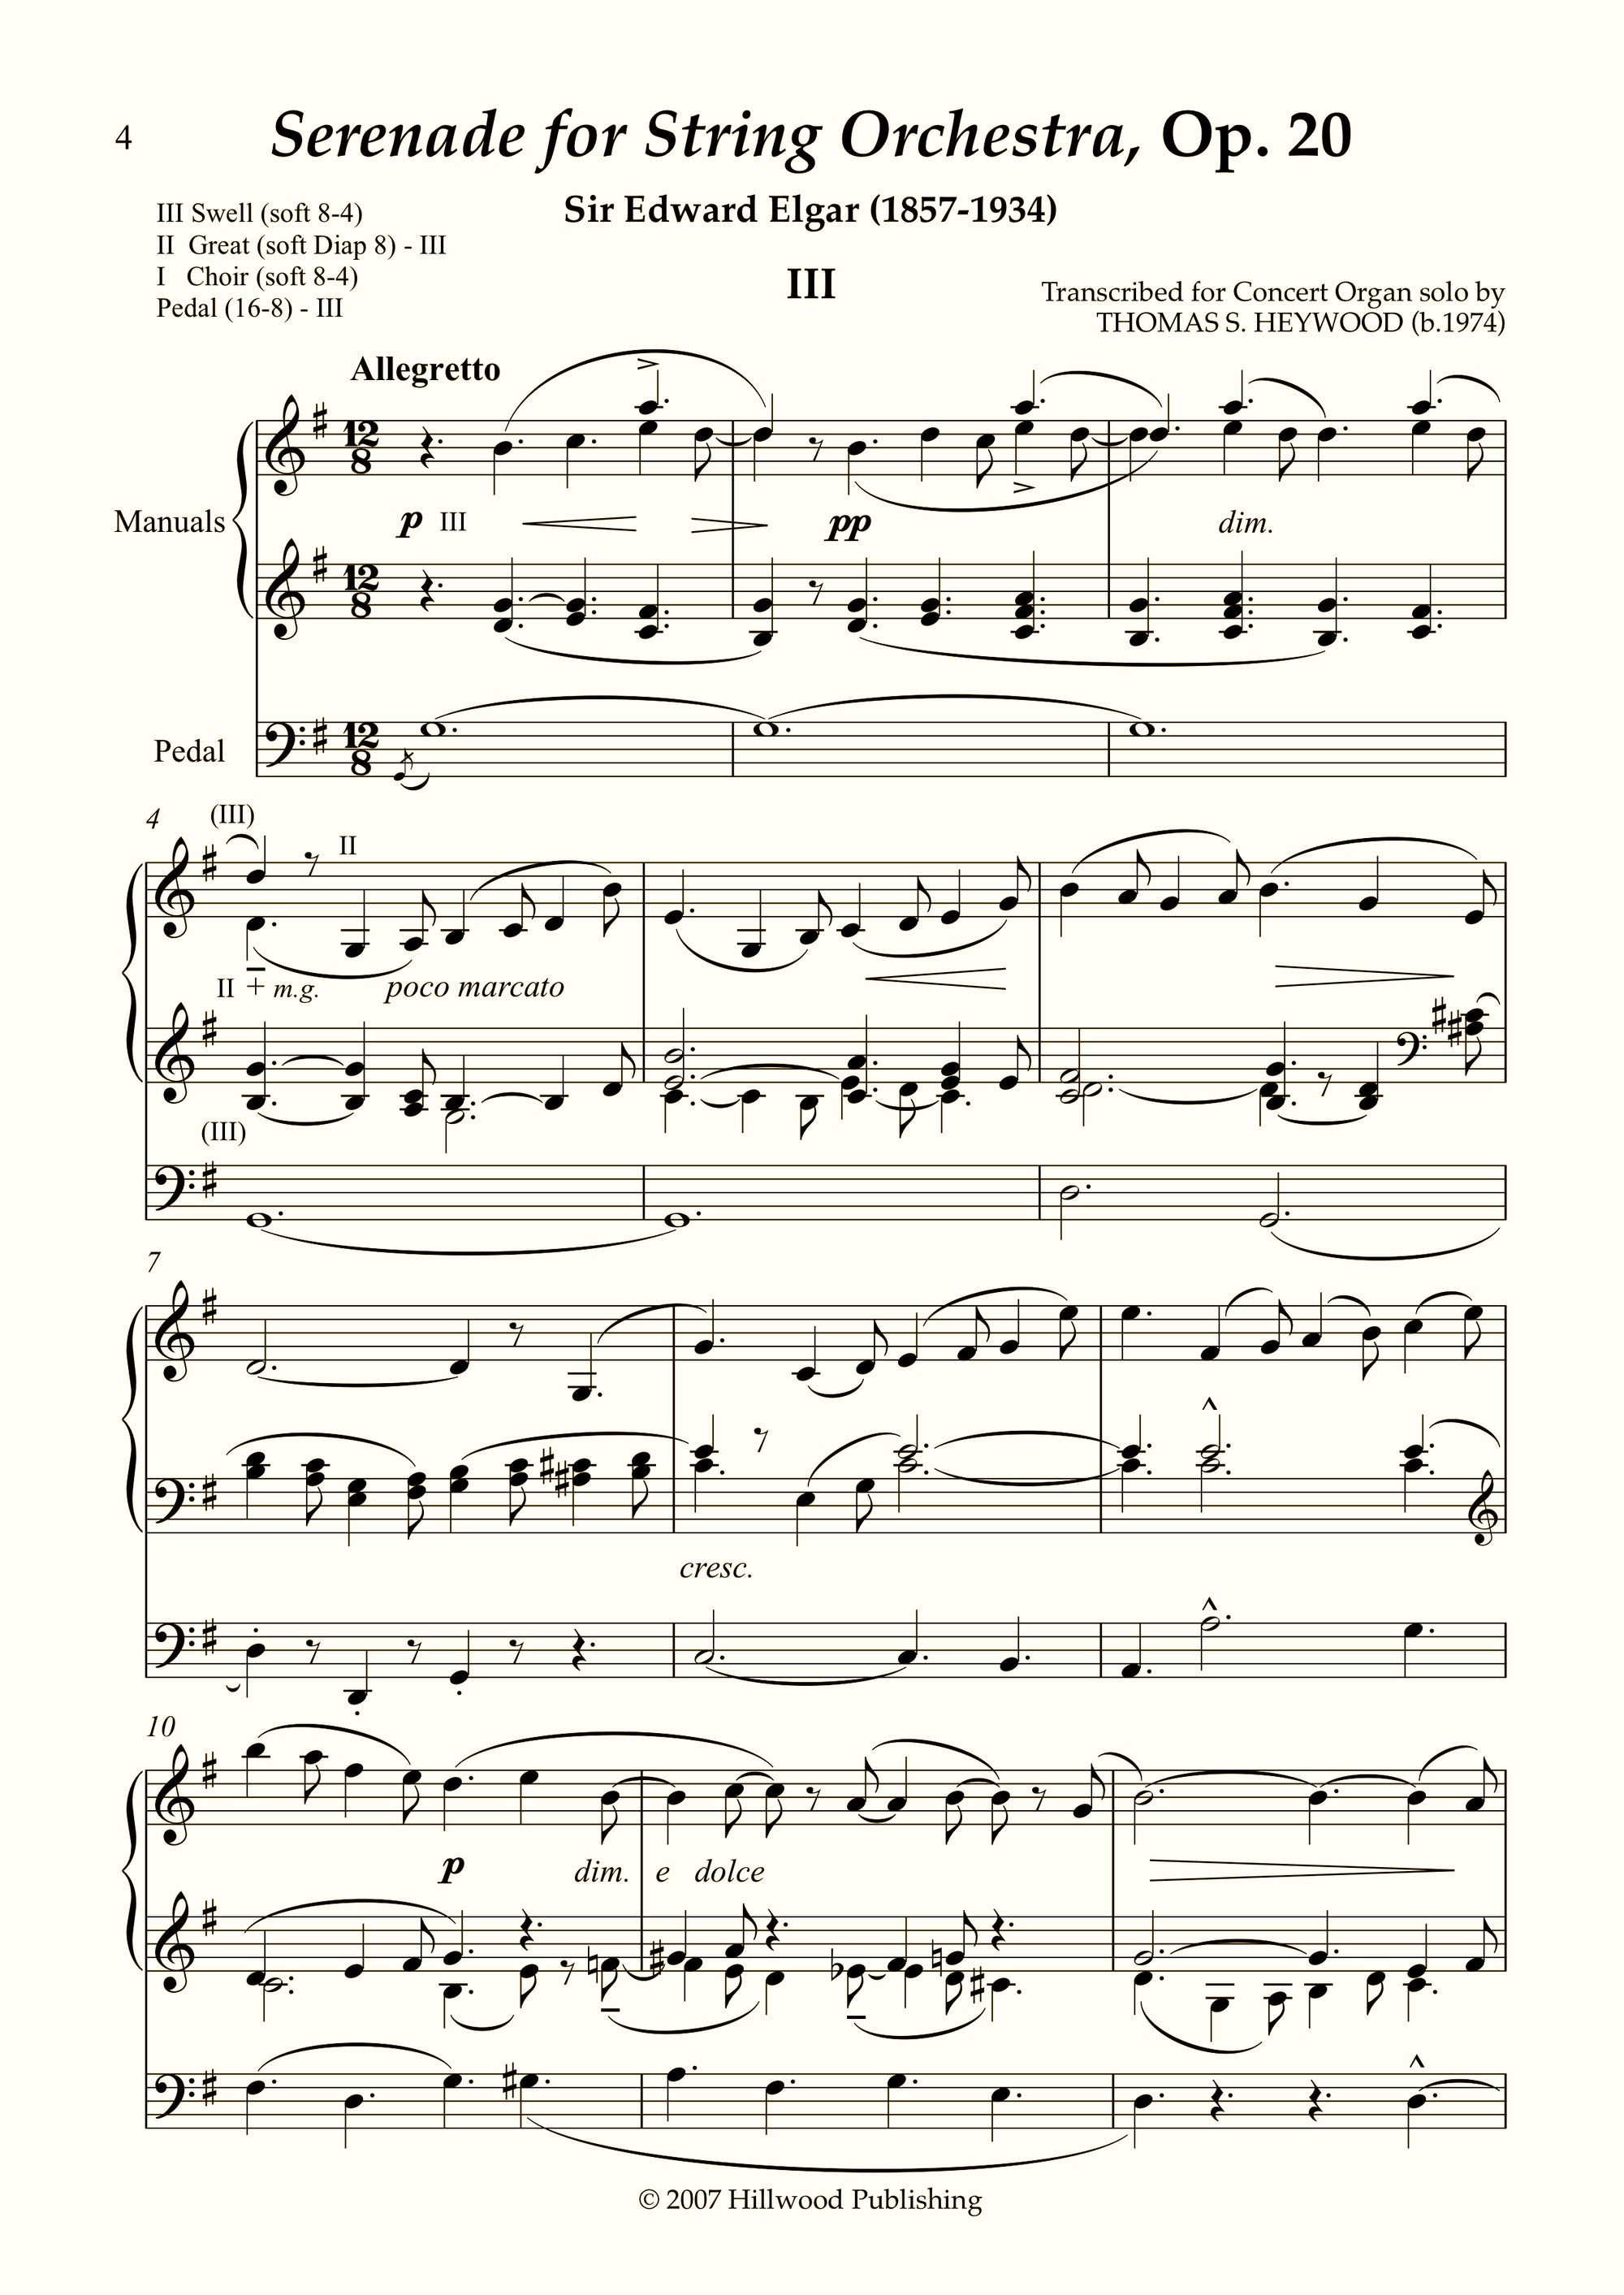 Elgar/Heywood - Allegretto from Serenade for String Orchestra, Op. 20 (Score)